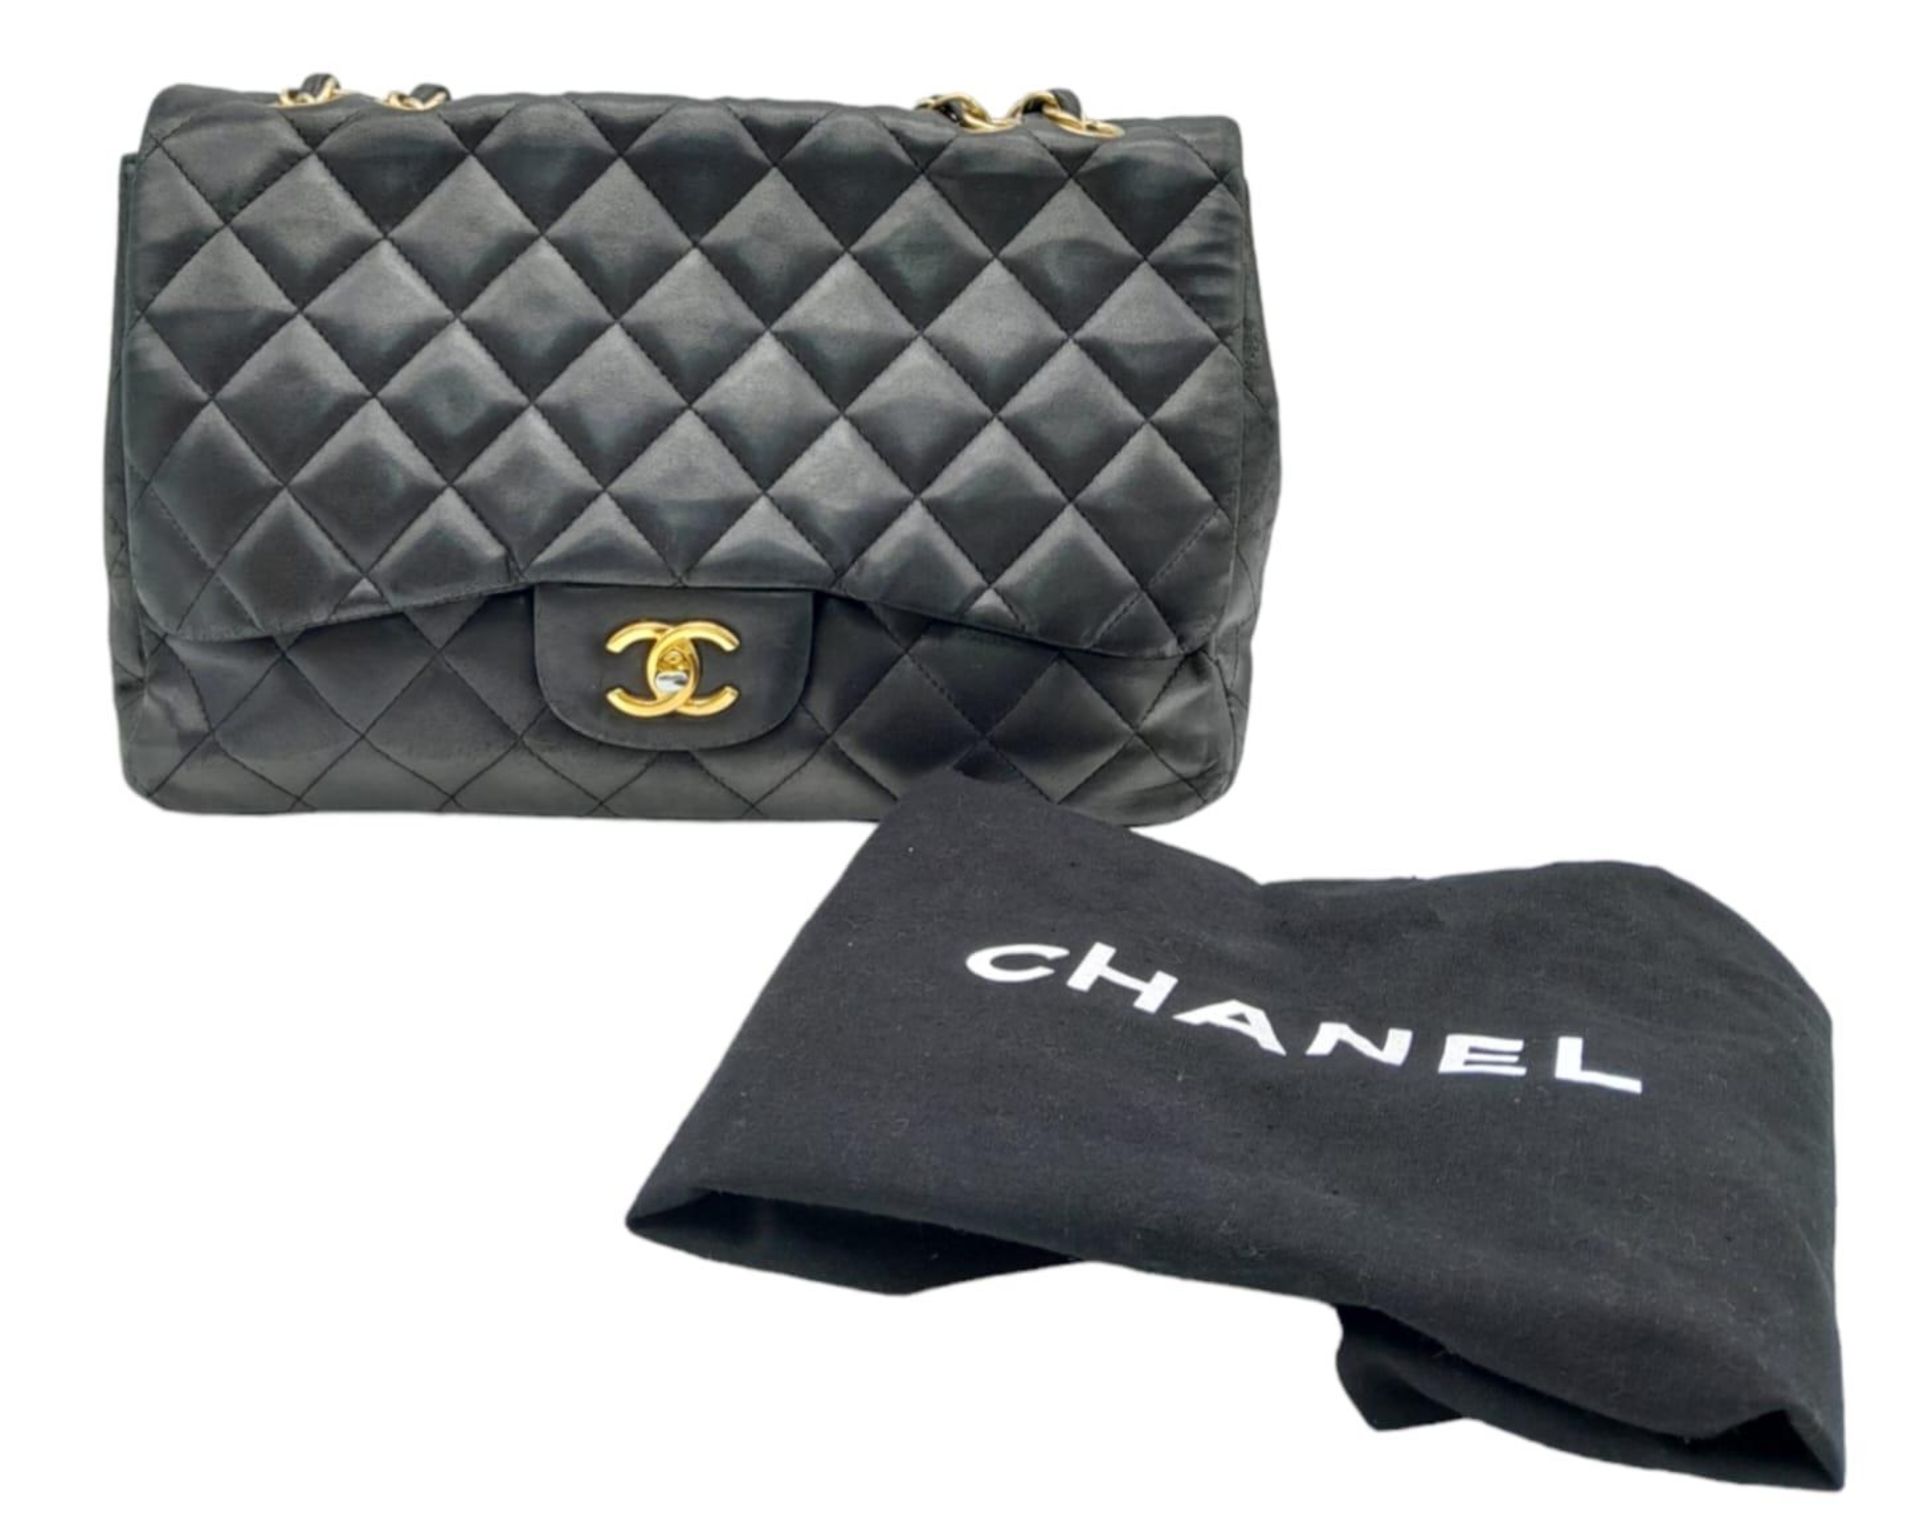 A Chanel Black Caviar Classic Single Flap Bag. Quilted pebbled leather exterior with gold-toned - Image 2 of 19